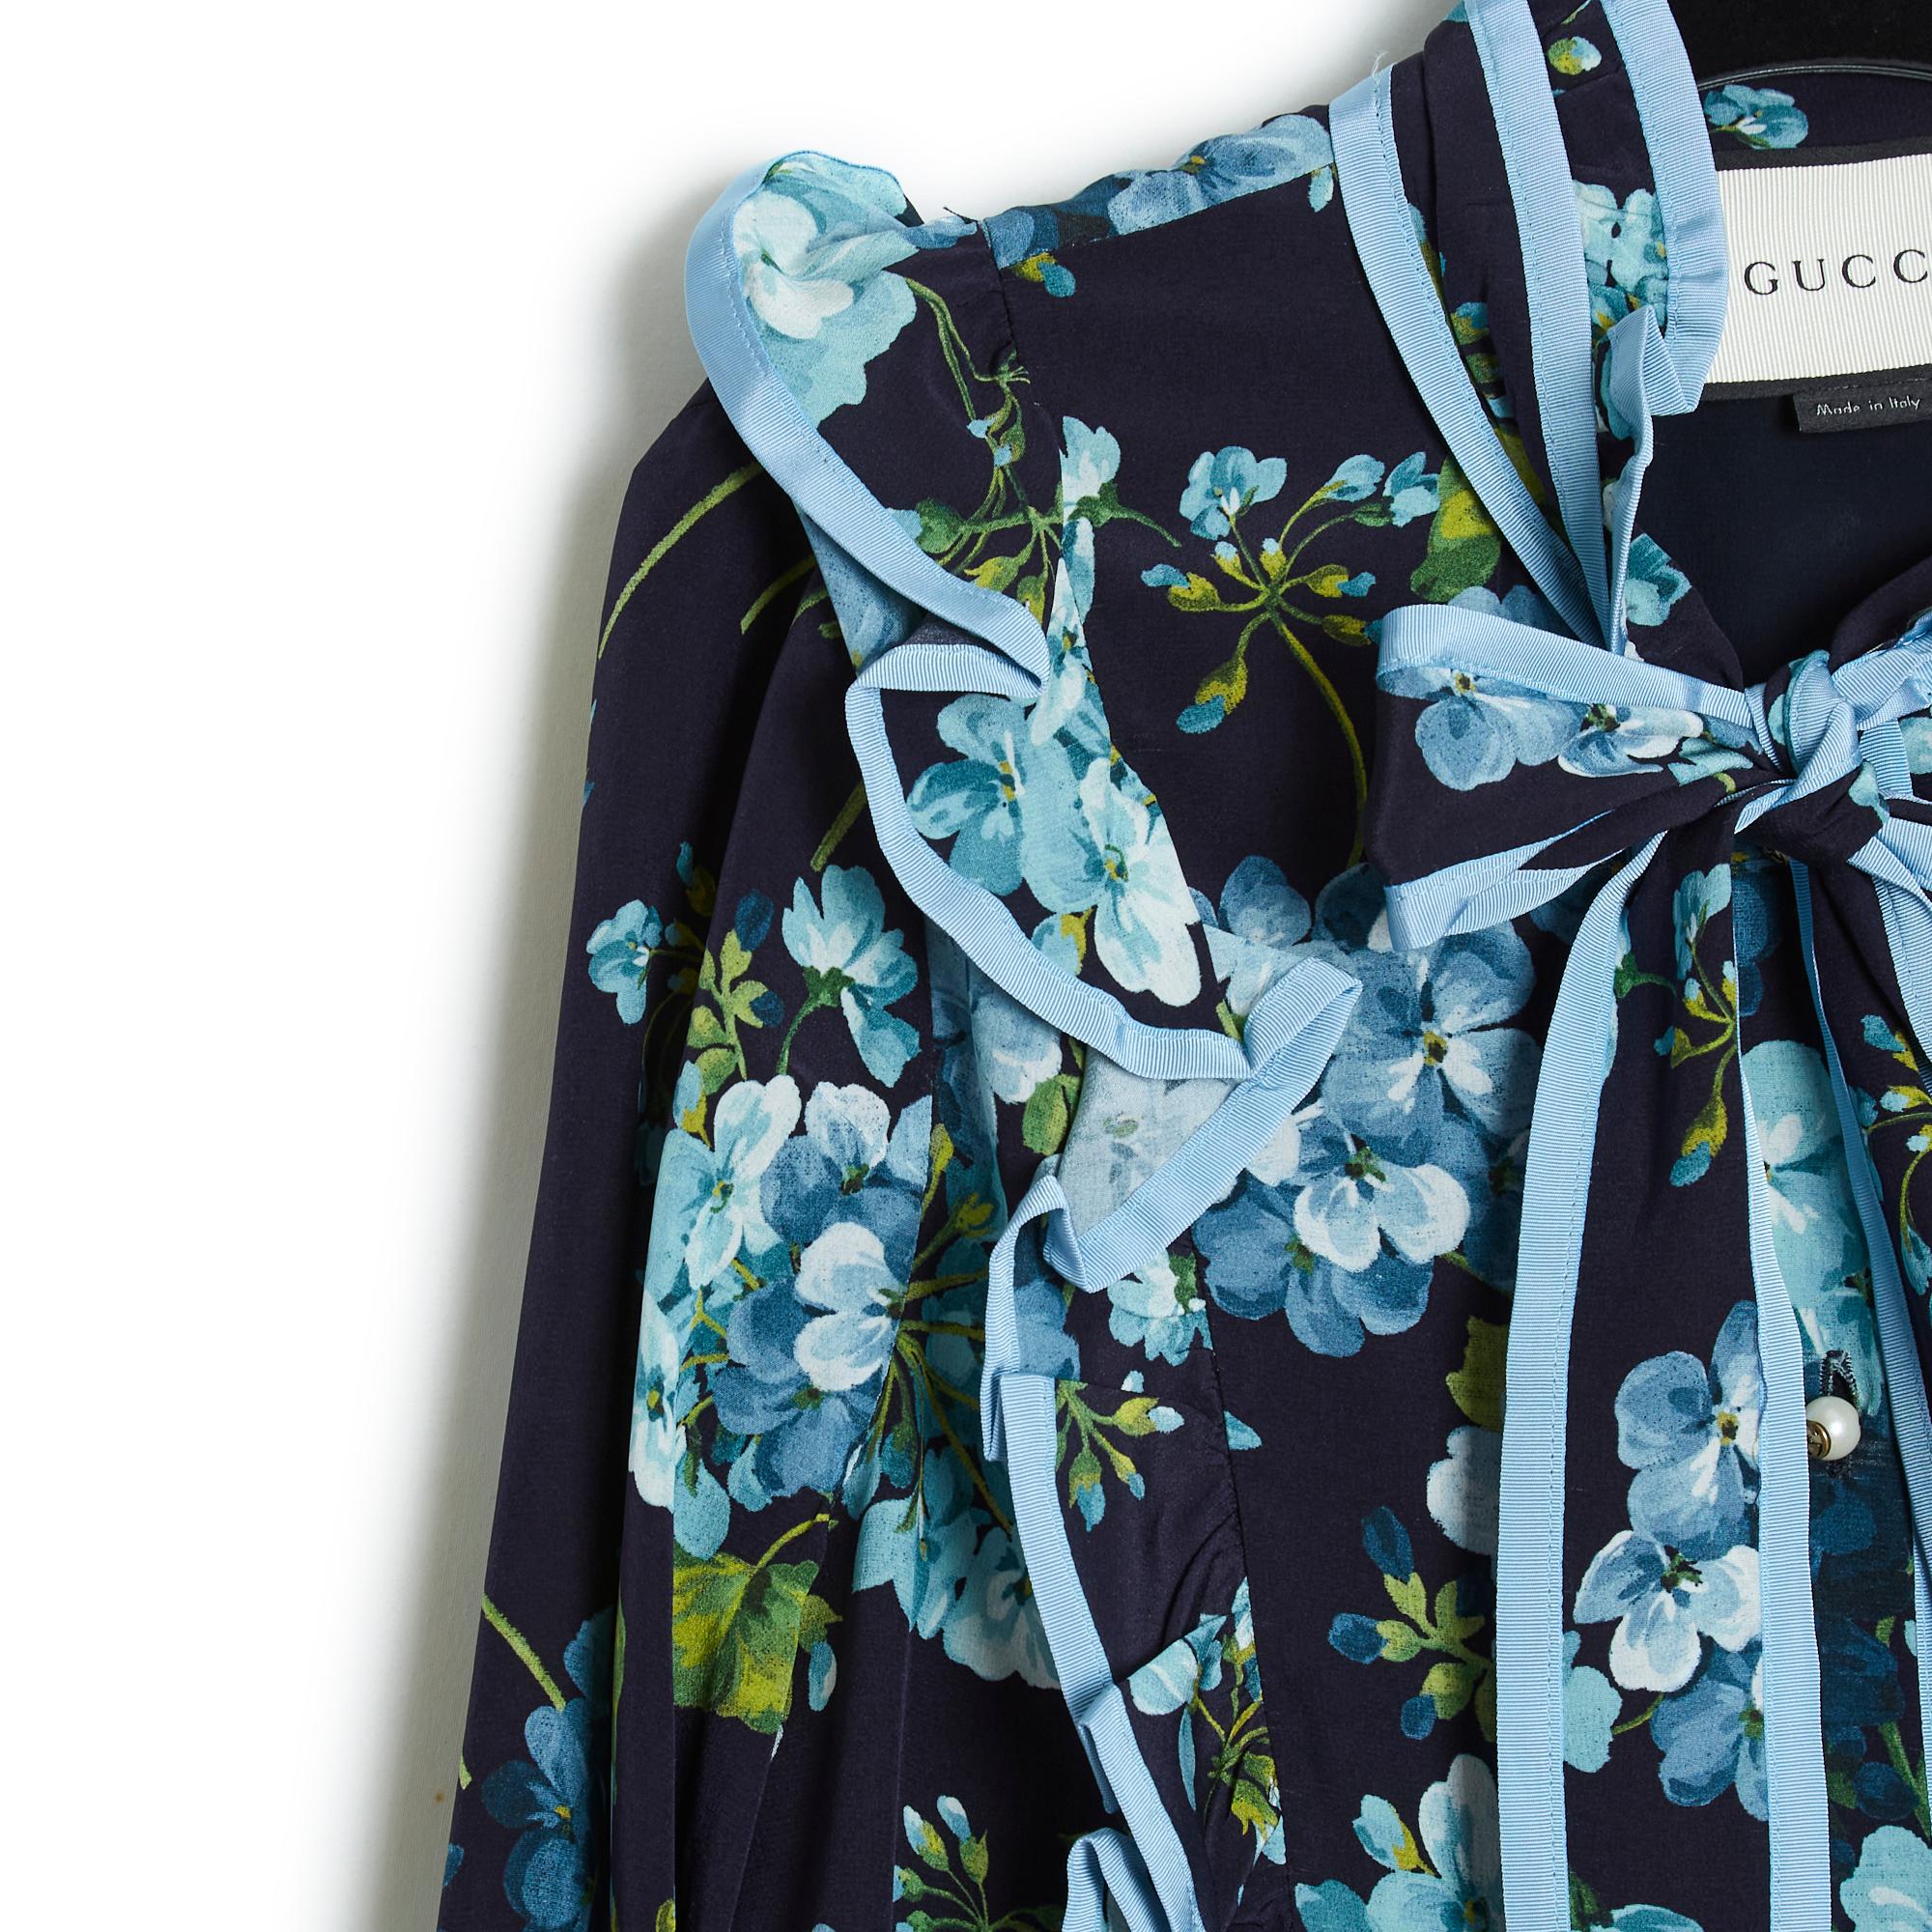 Gucci dress Pre fall 2016 collection (by Alessandro Michele) in light navy blue evening crepe (almost black) printed floral pattern in shades of sky blue, ruffles and details trimmed with sky blue silk ribbon also, high collar with lavaliere, closed